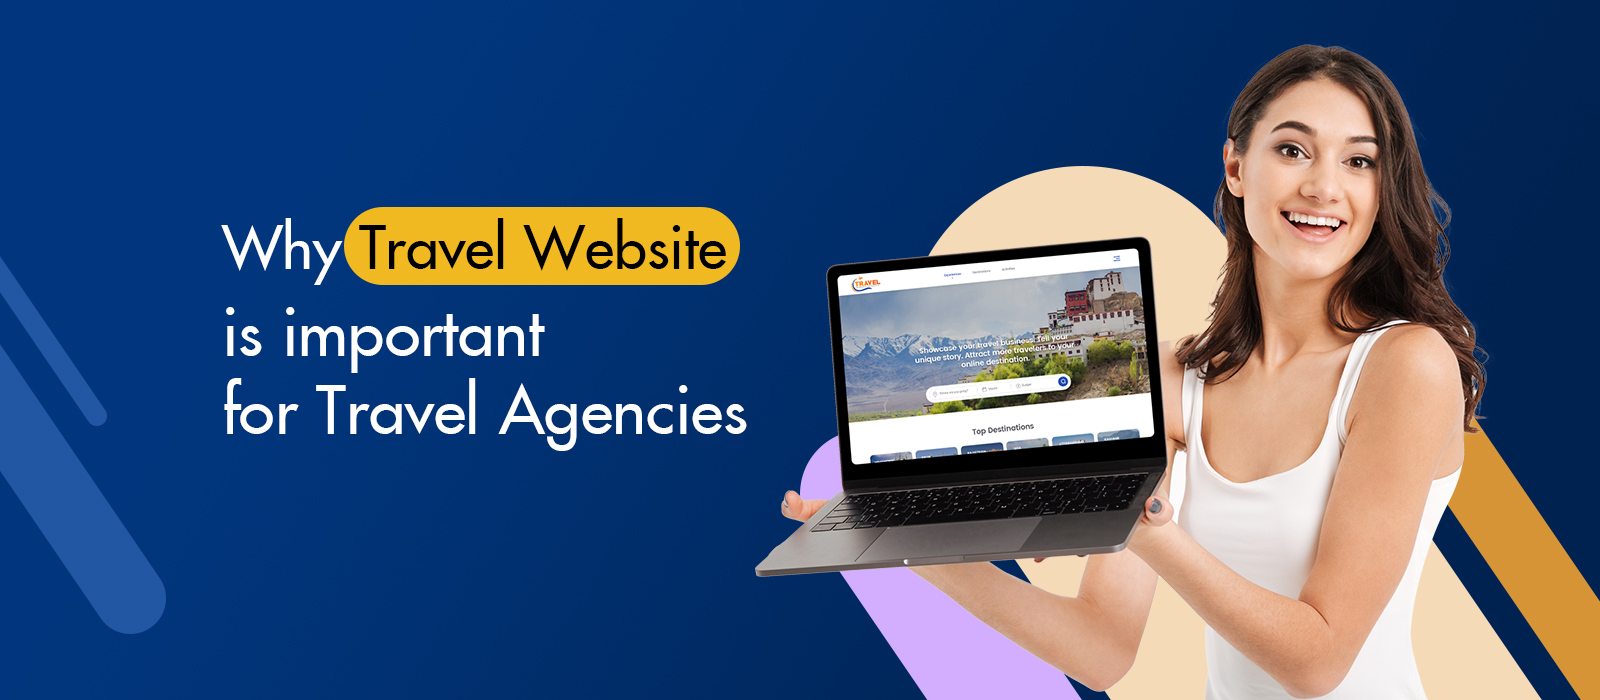 Why travel website is important for travel agencies